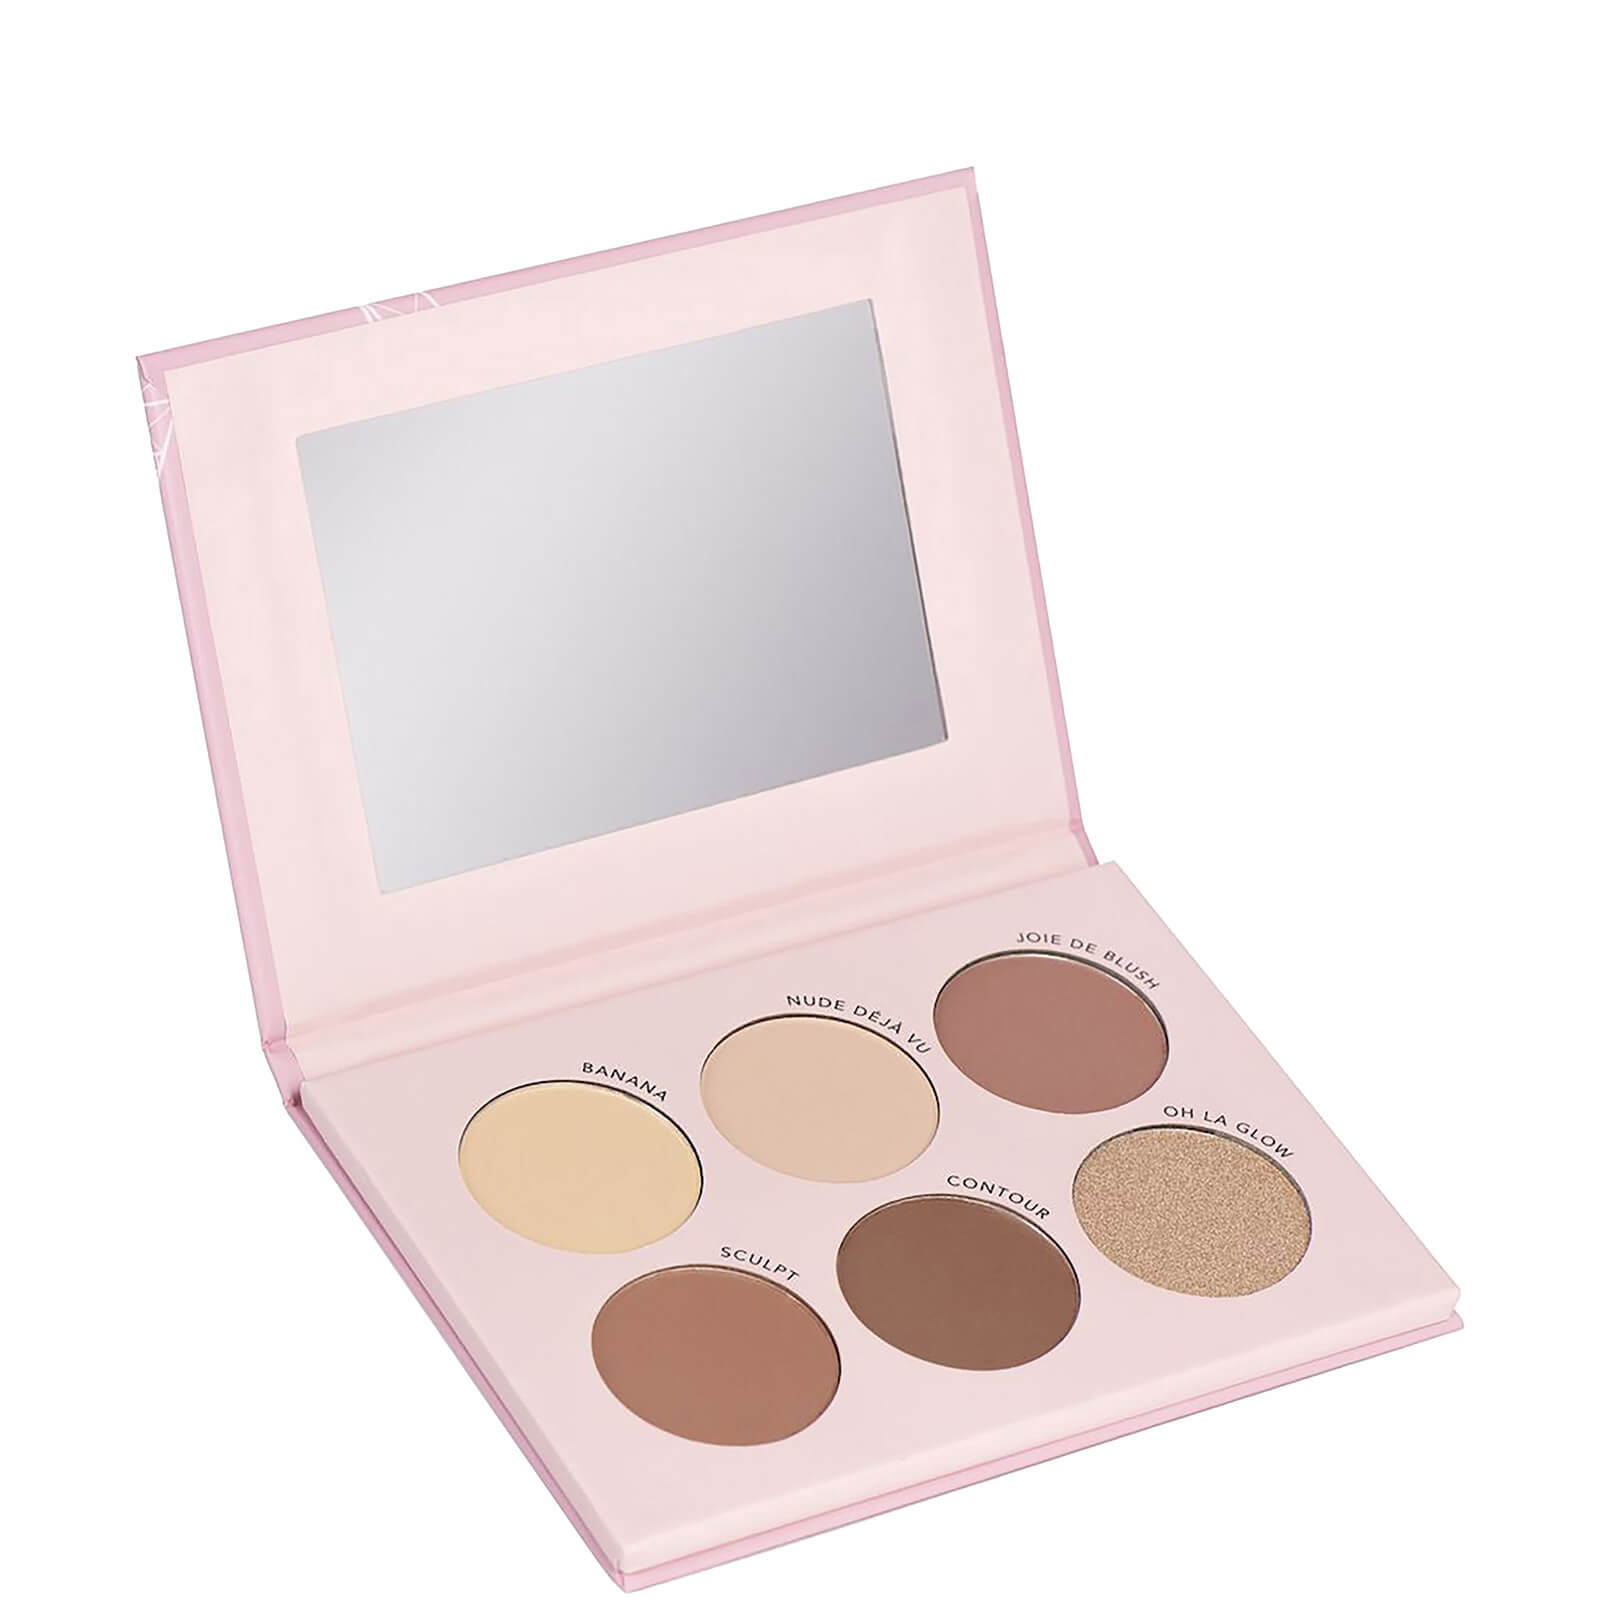 Image of Bourjois Noha Face Contouring Palette, 18g